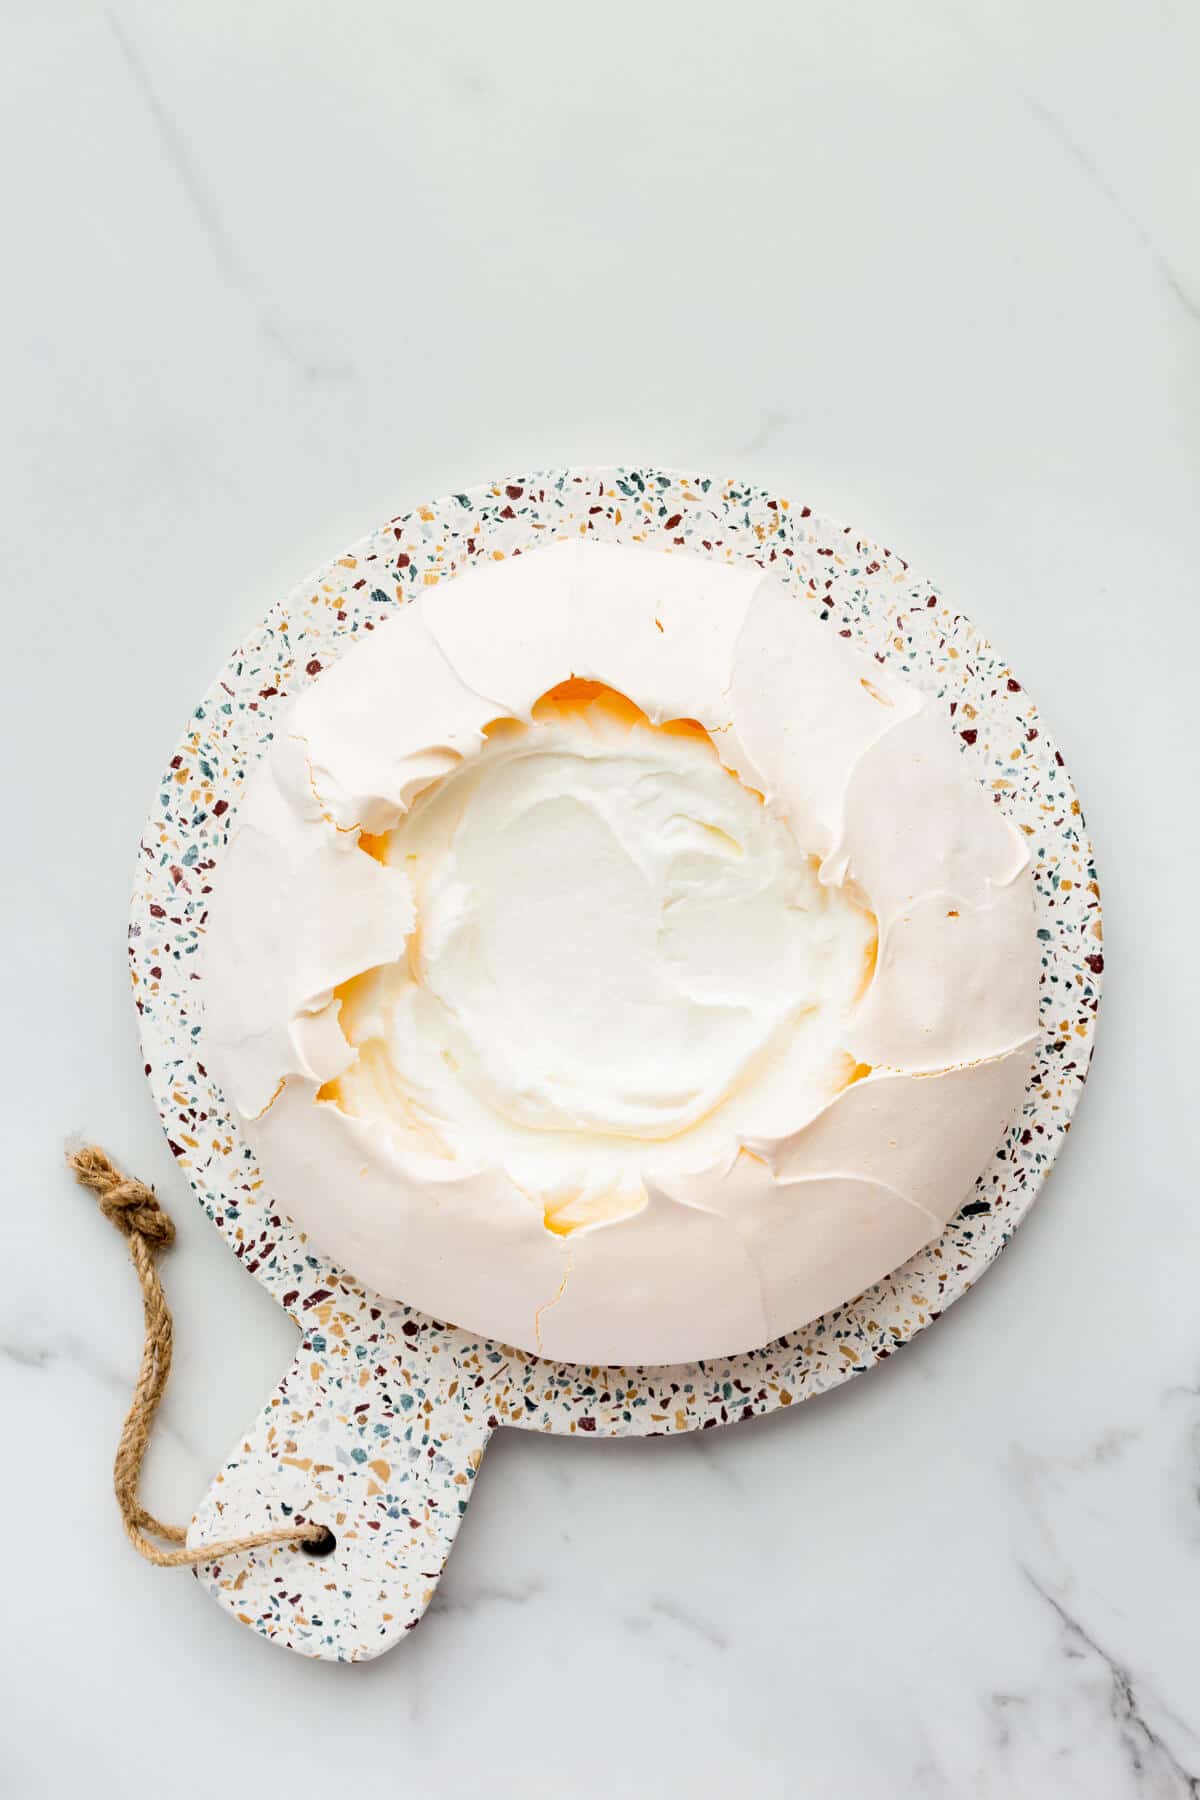 Pavlova cake filled with whipped cream.